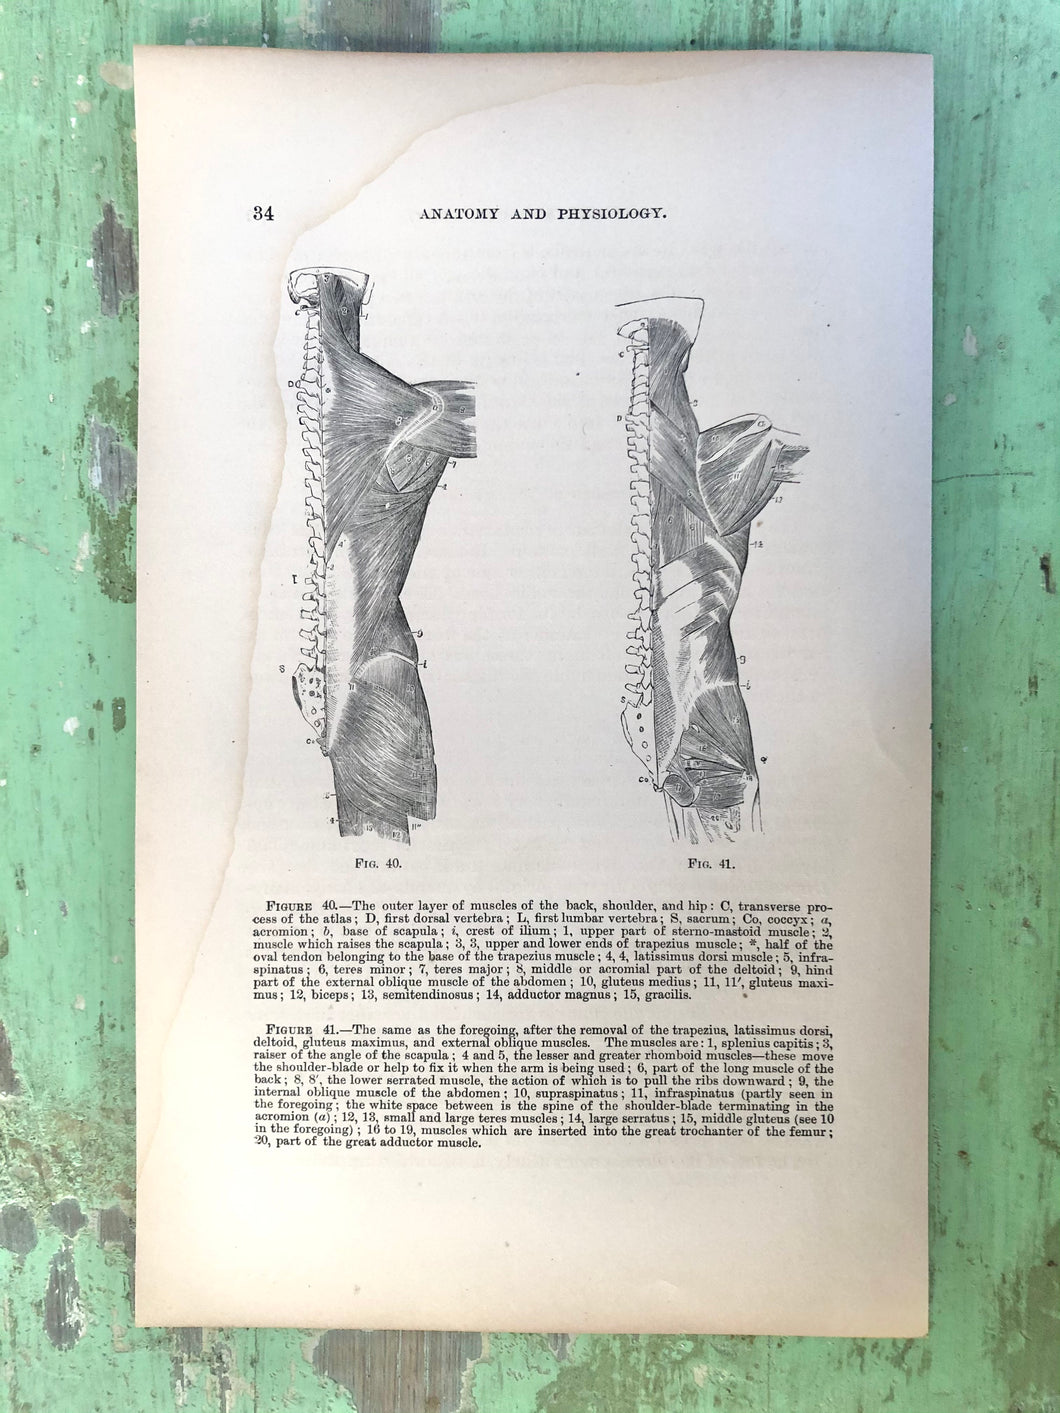 Print from “Wood’s Household Practice of Medicine, Hygeine and Surgery, Vol. I”